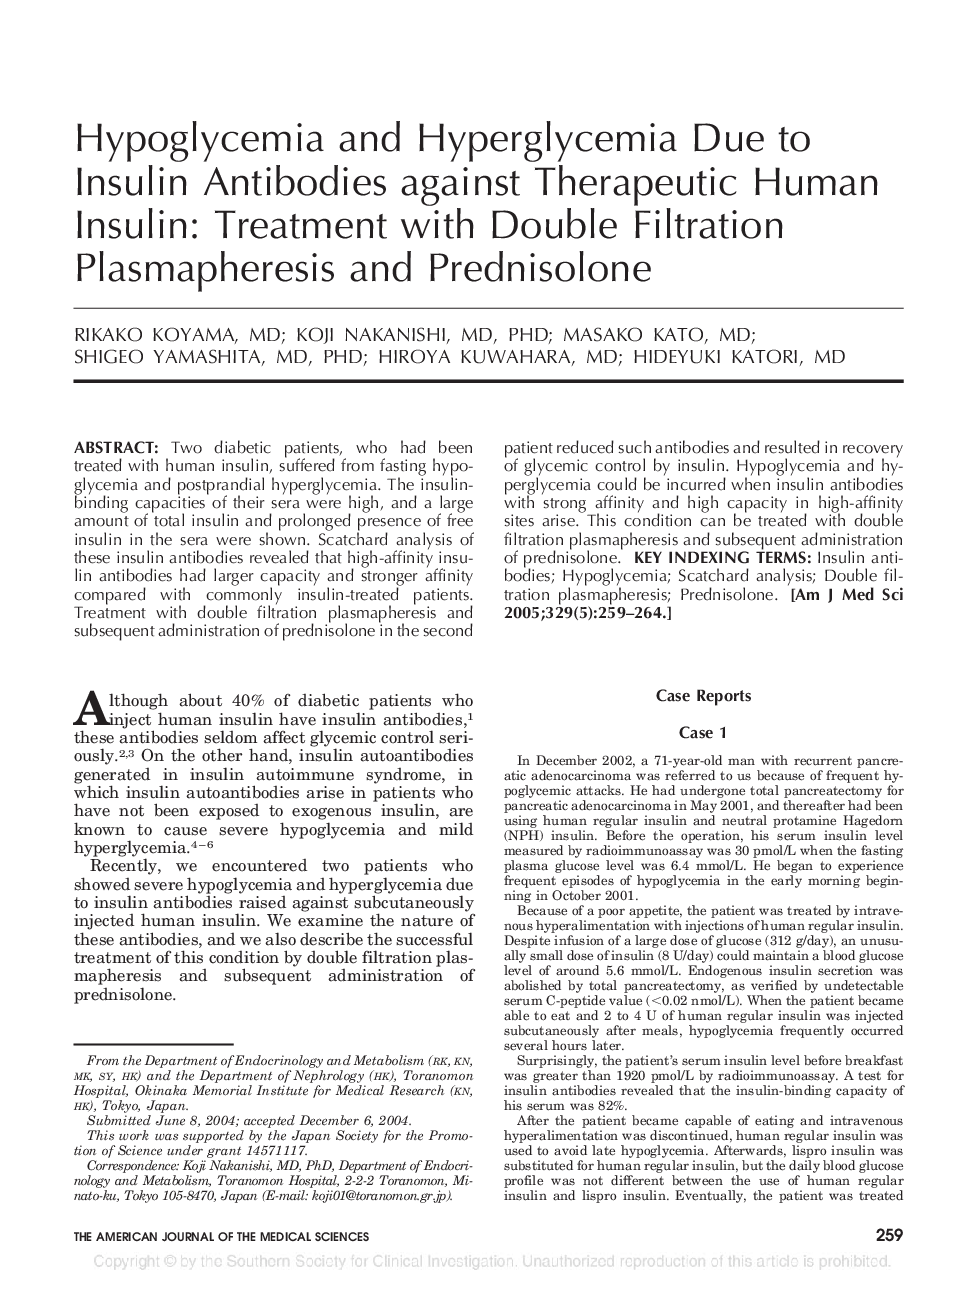 Hypoglycemia and Hyperglycemia Due to Insulin Antibodies against Therapeutic Human Insulin: Treatment with Double Filtration Plasmapheresis and Prednisolone